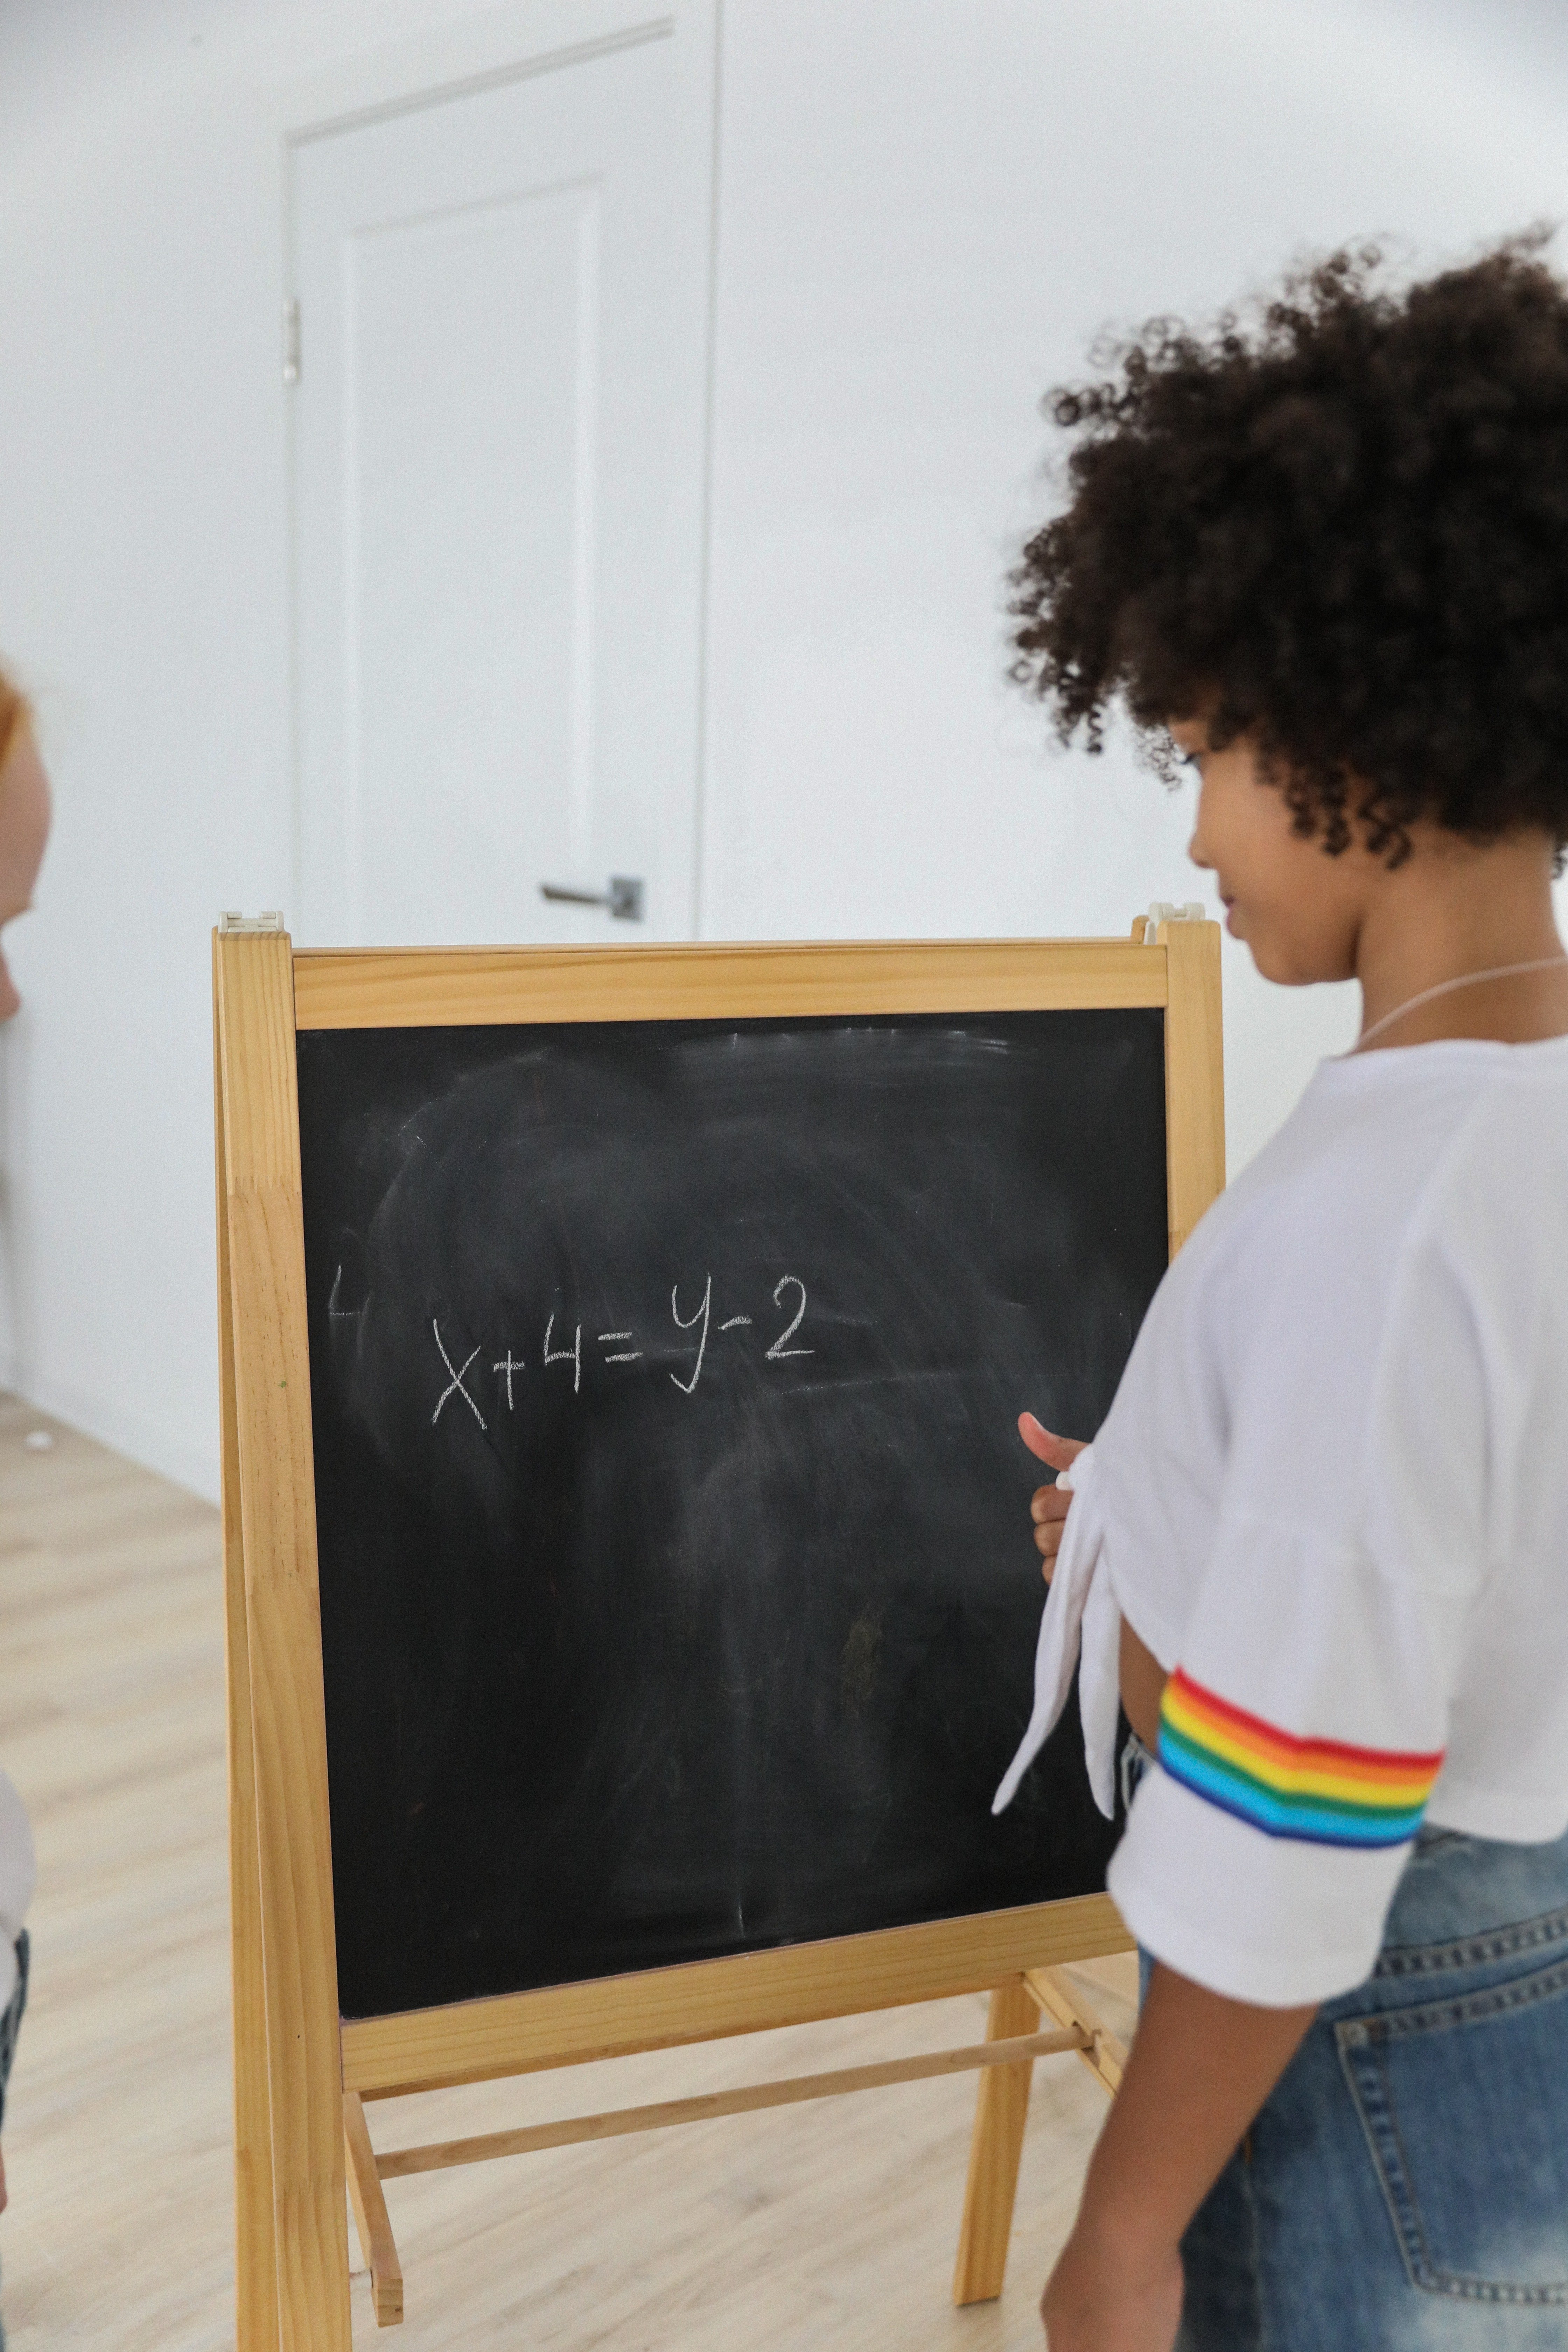 A girl attempts to figure out the equation on the chalkboard in front of her | Photo: Pexels